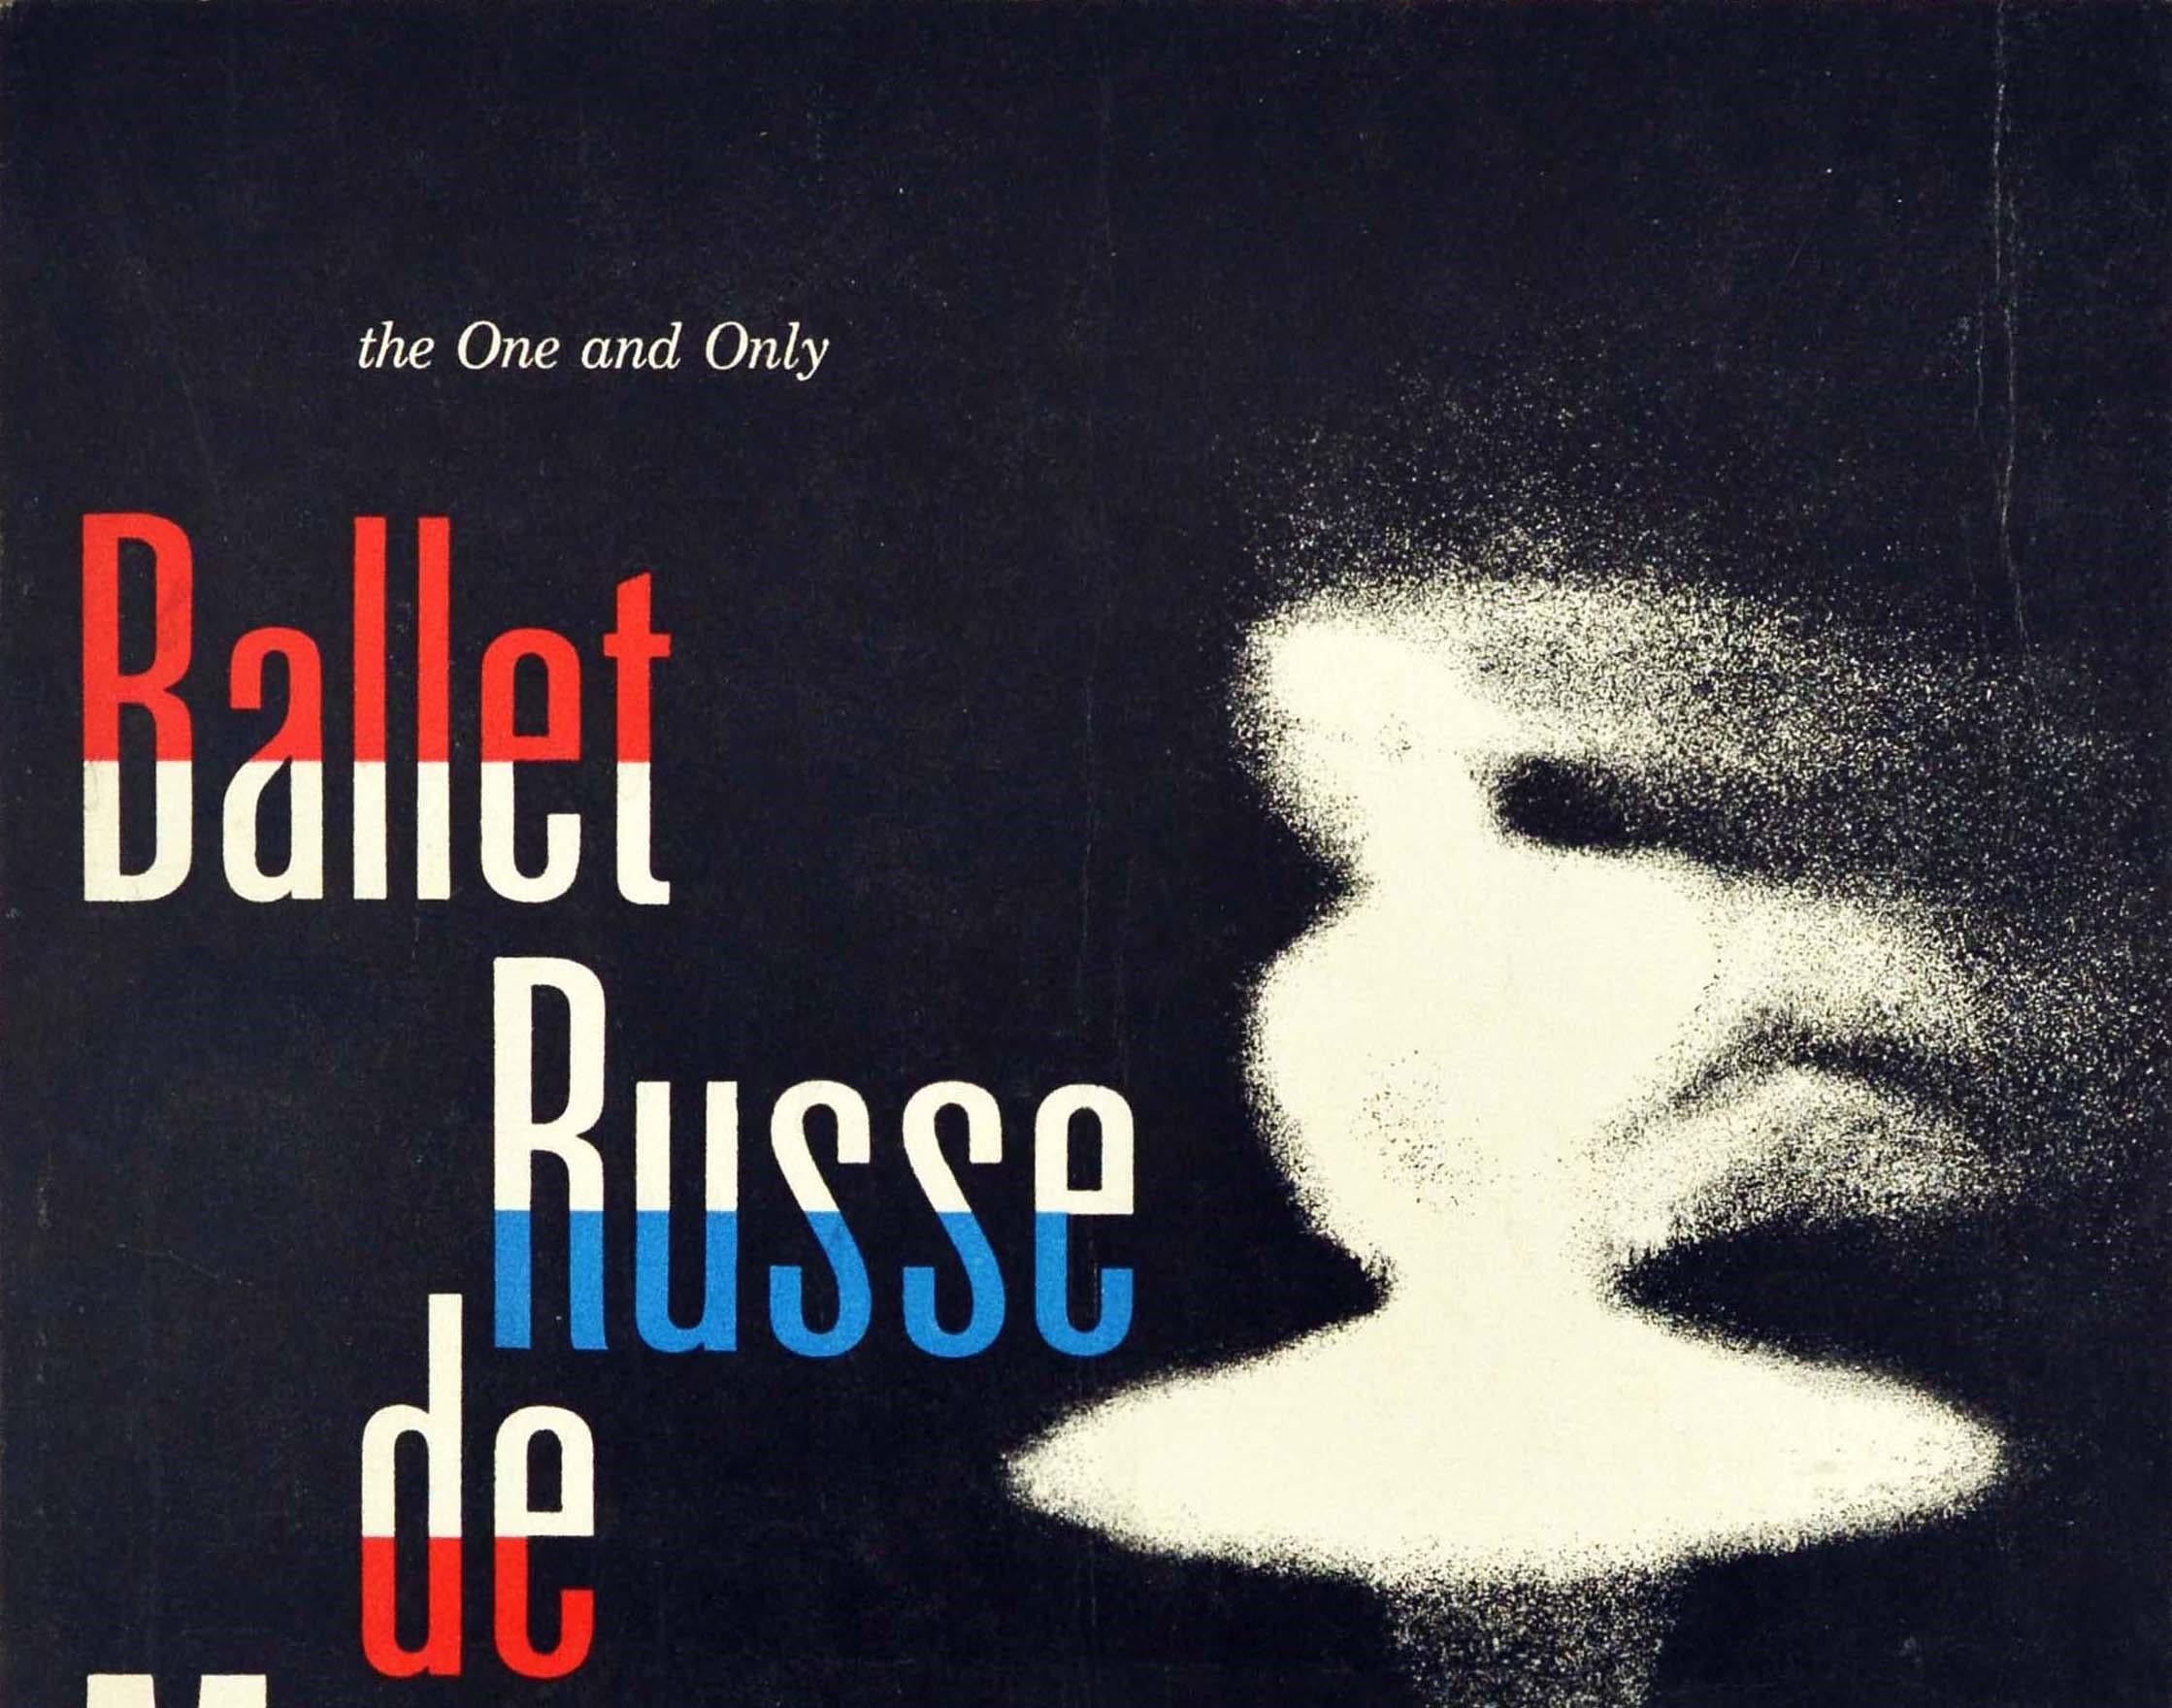 Original Vintage Poster The One And Only Ballet Russe De Monte Carlo Dancer Art - Print by Unknown